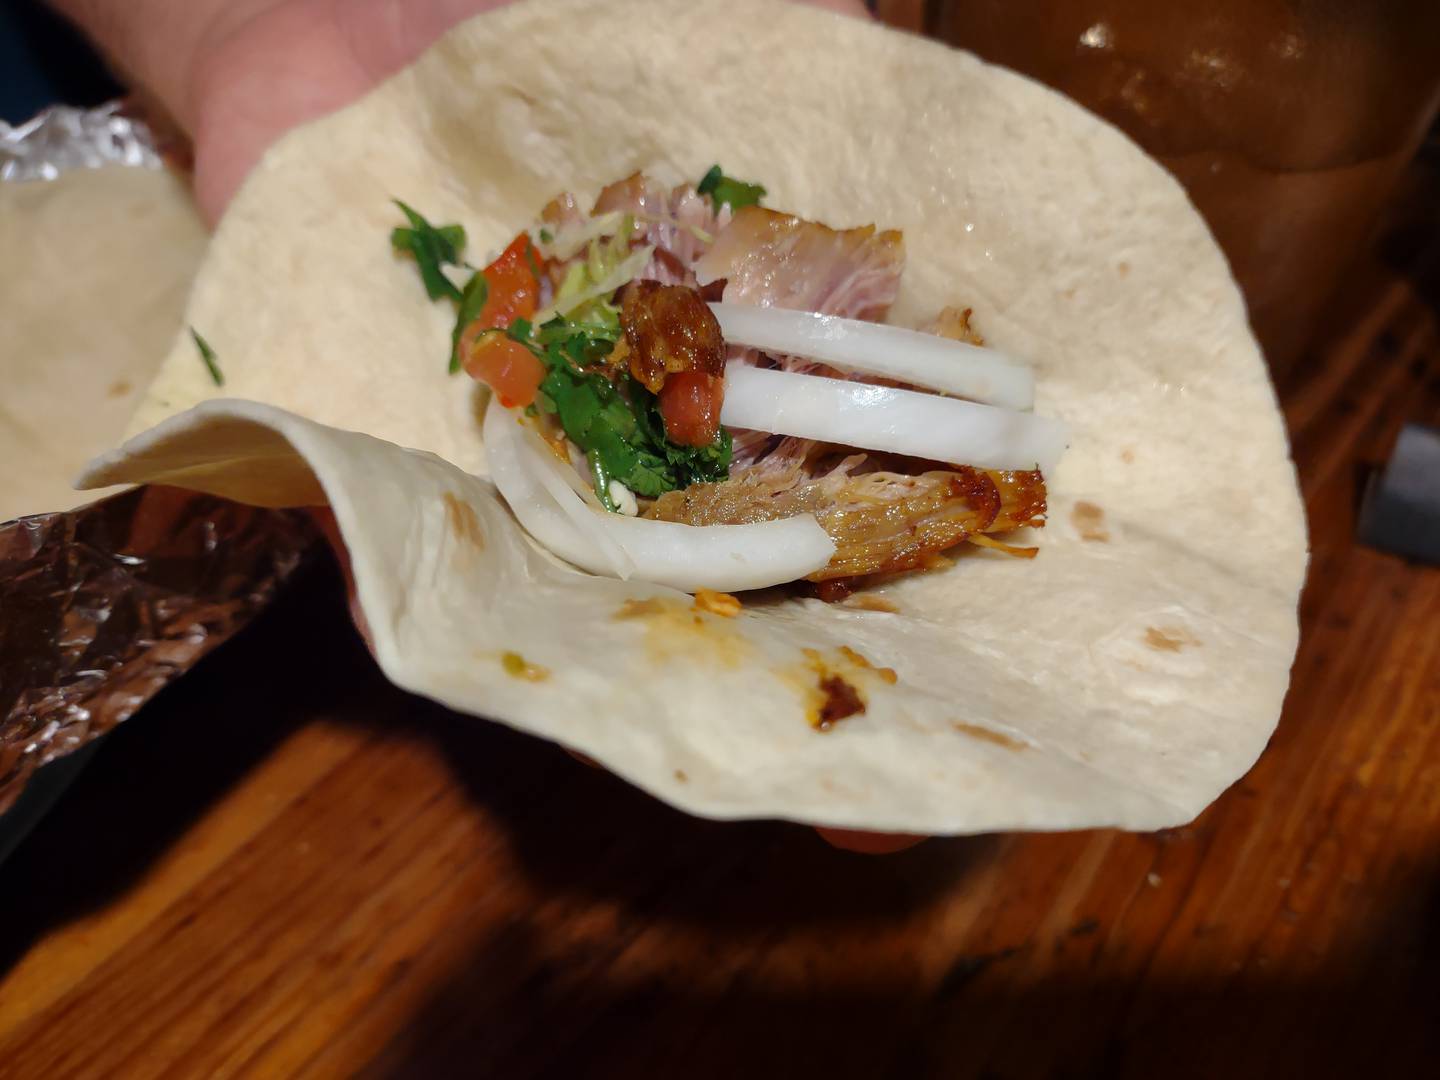 Three flour tortillas are provided with the carnitas meal to make wraps of meat, onion and pico de gallo at La Fondita Mexican Grill in Ottawa.